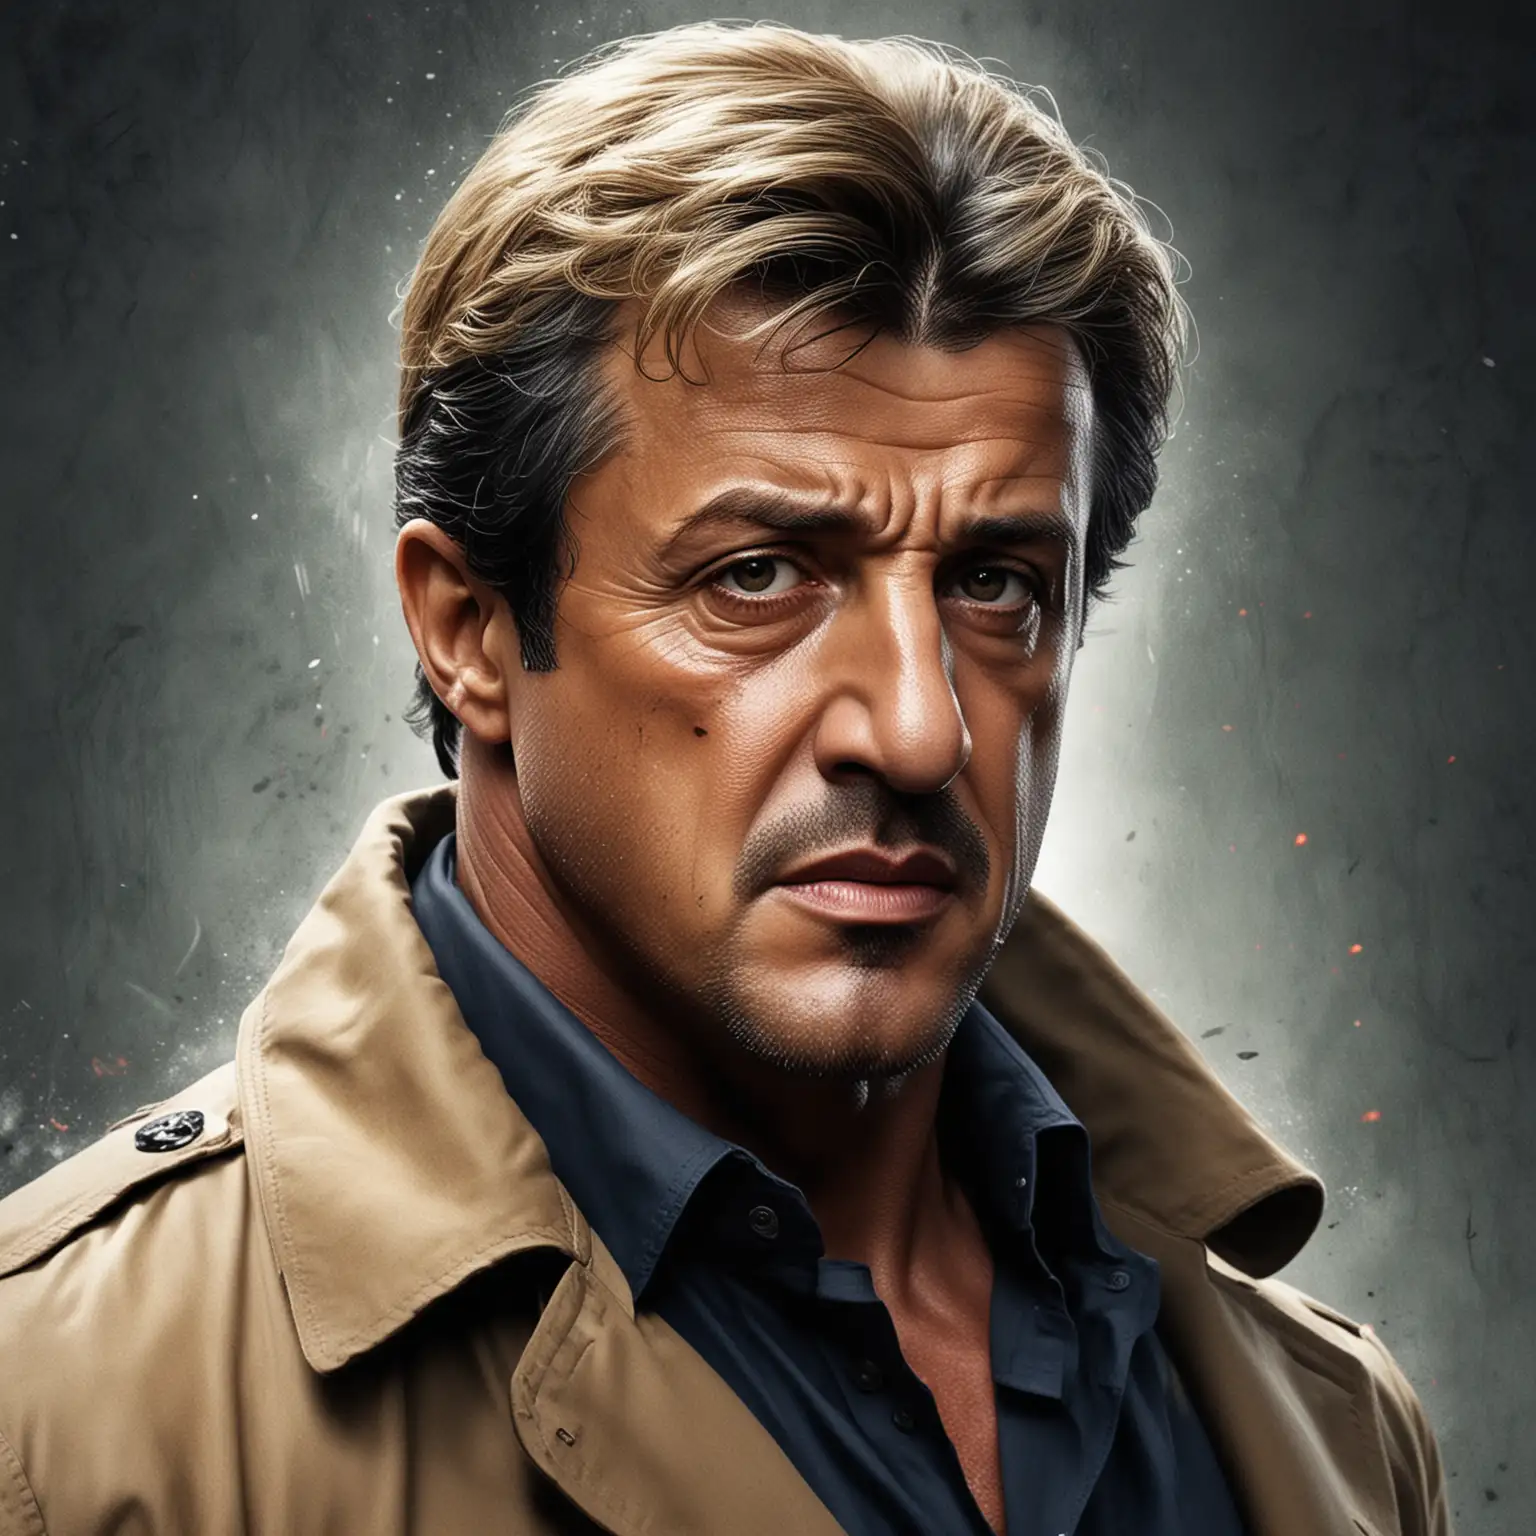 Detective Sylvester Stallone with Blond Hair in Movie Poster Art Style